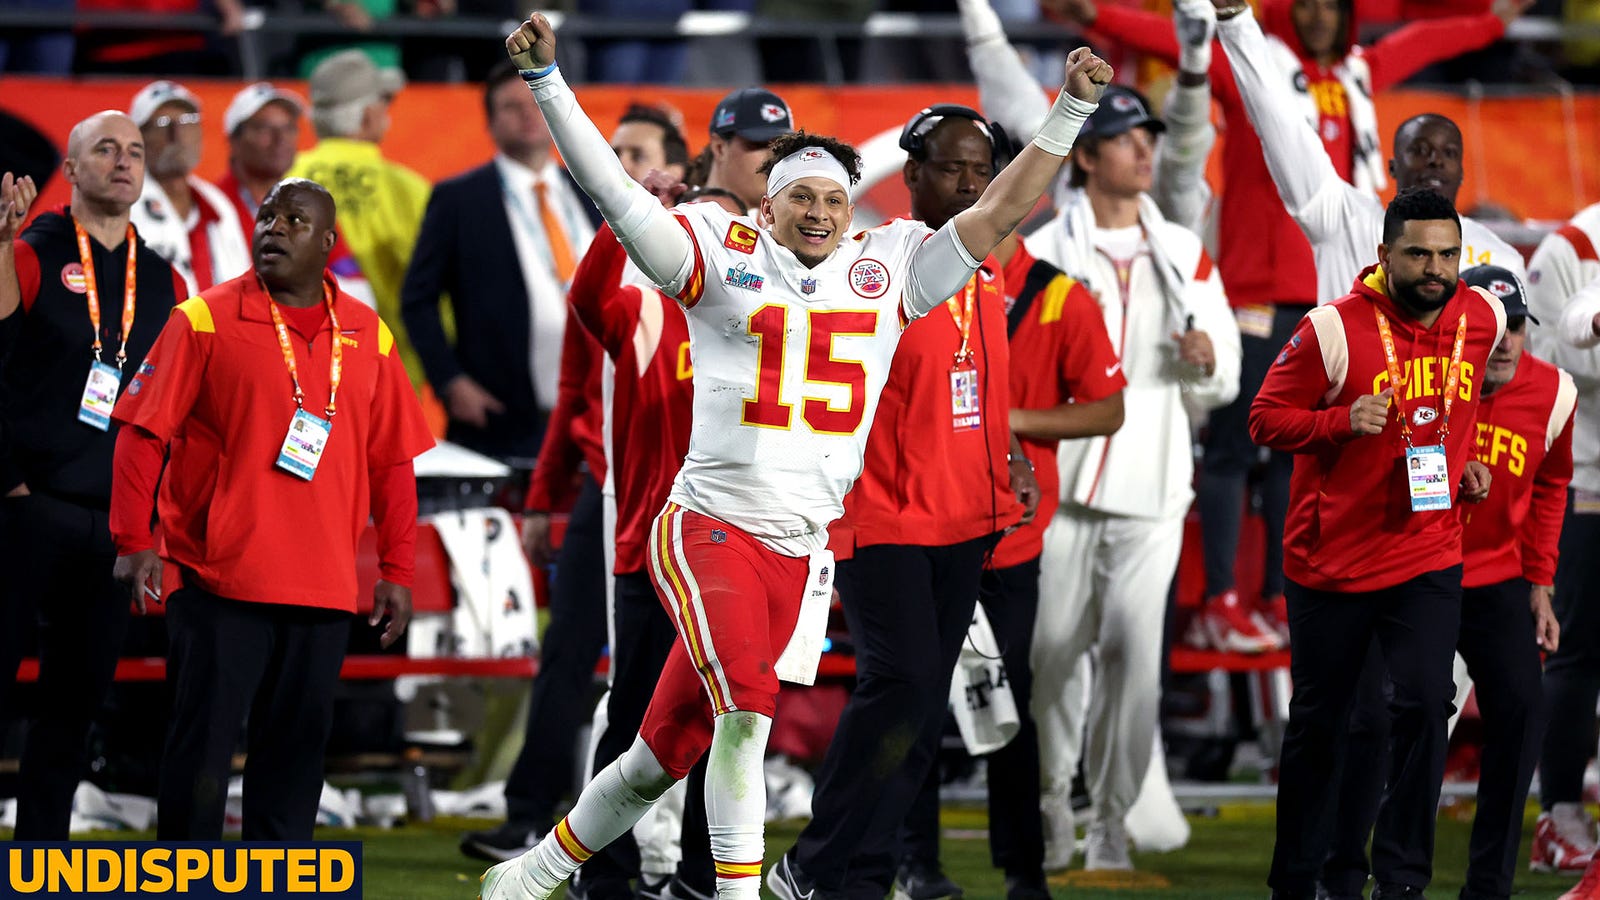 Skip predicts Chiefs defeat 49ers, win back-to-back Super Bowls 